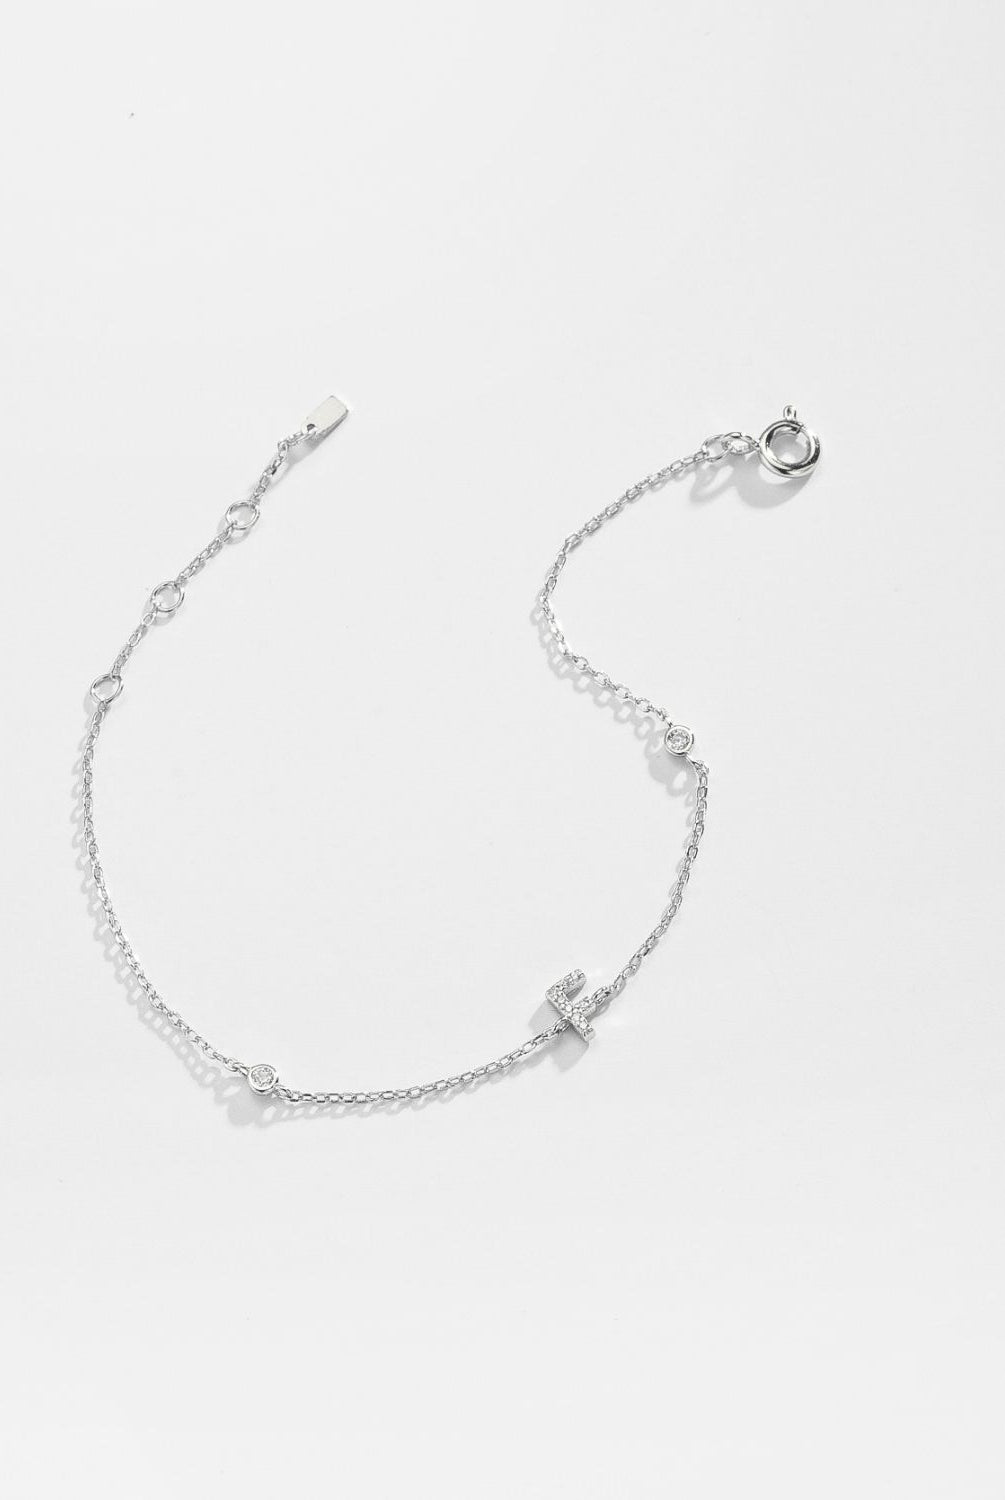 A To F Zircon 925 Sterling Silver Bracelet - GemThreads Boutique